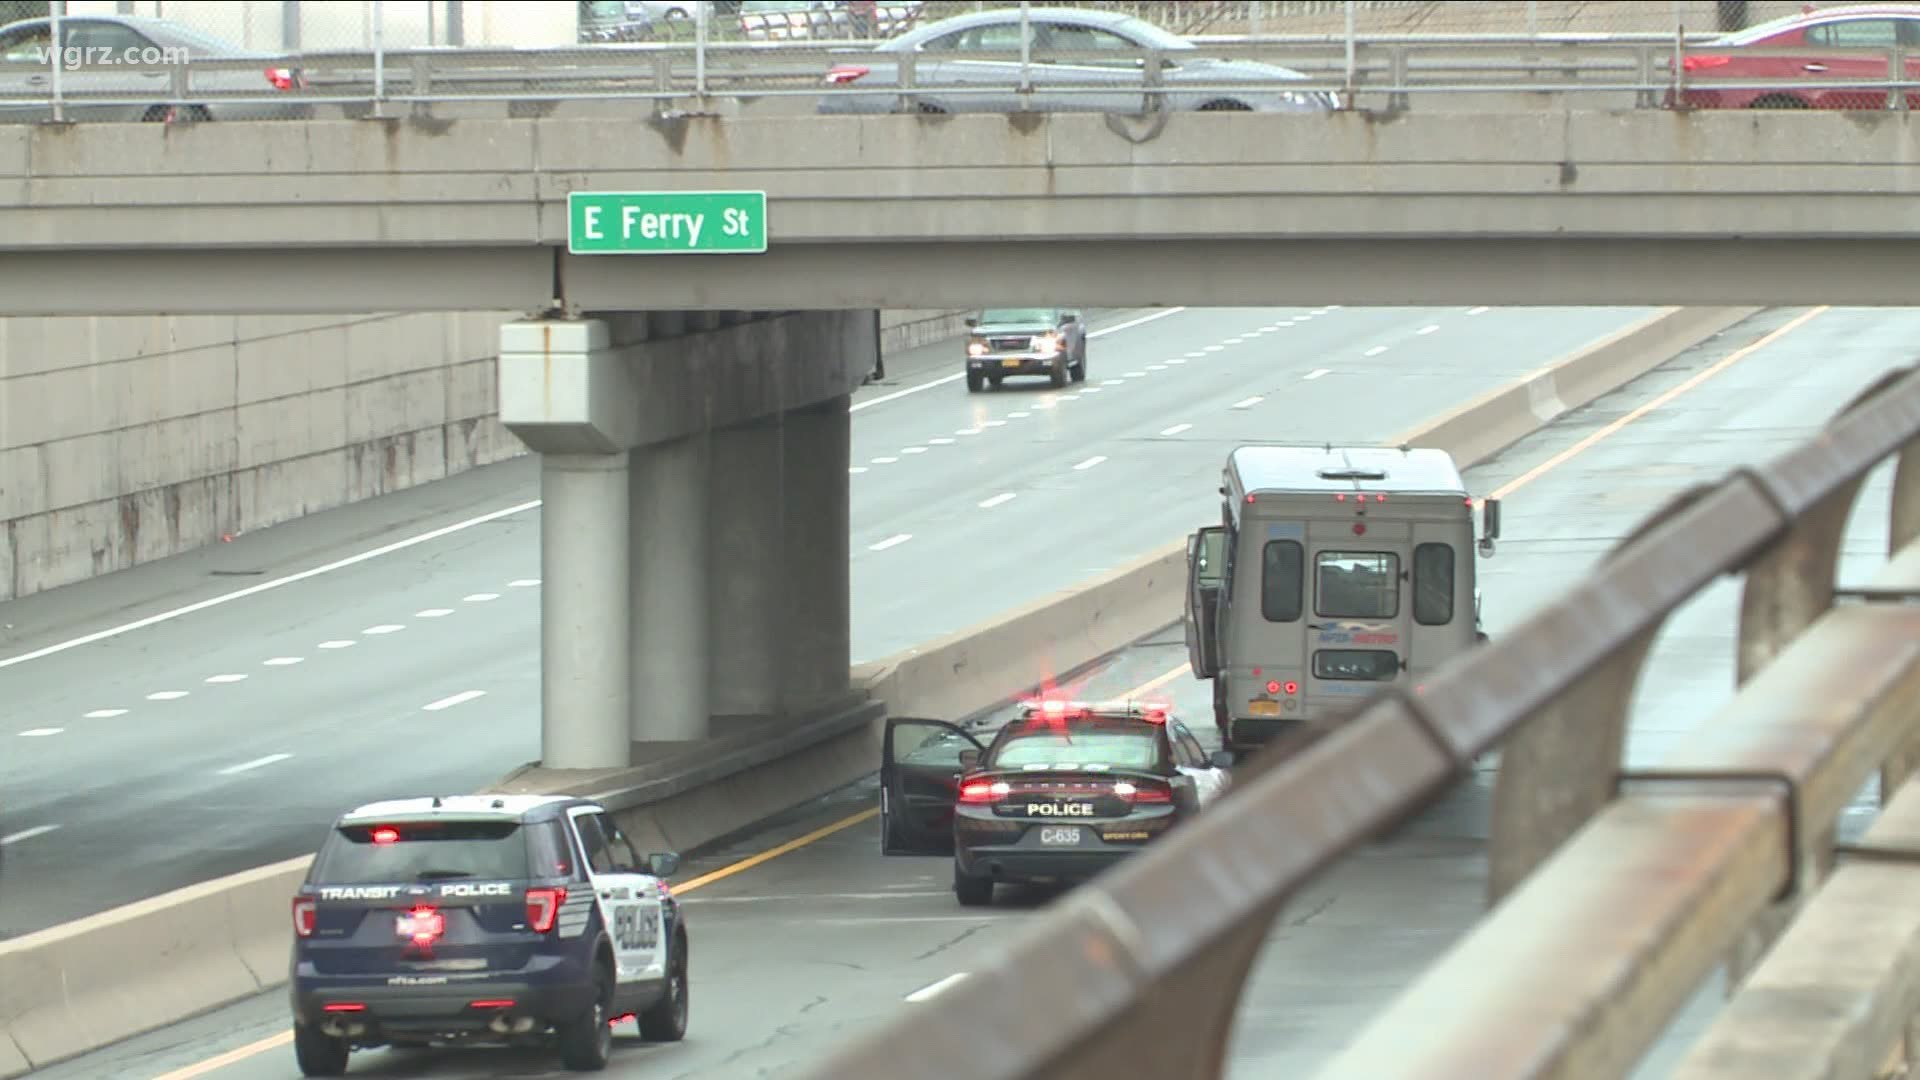 A section of the expressway was closed for about an hour. The NFTA tells us that a Paratransit vehicle was rear ended and hit the side wall and median.